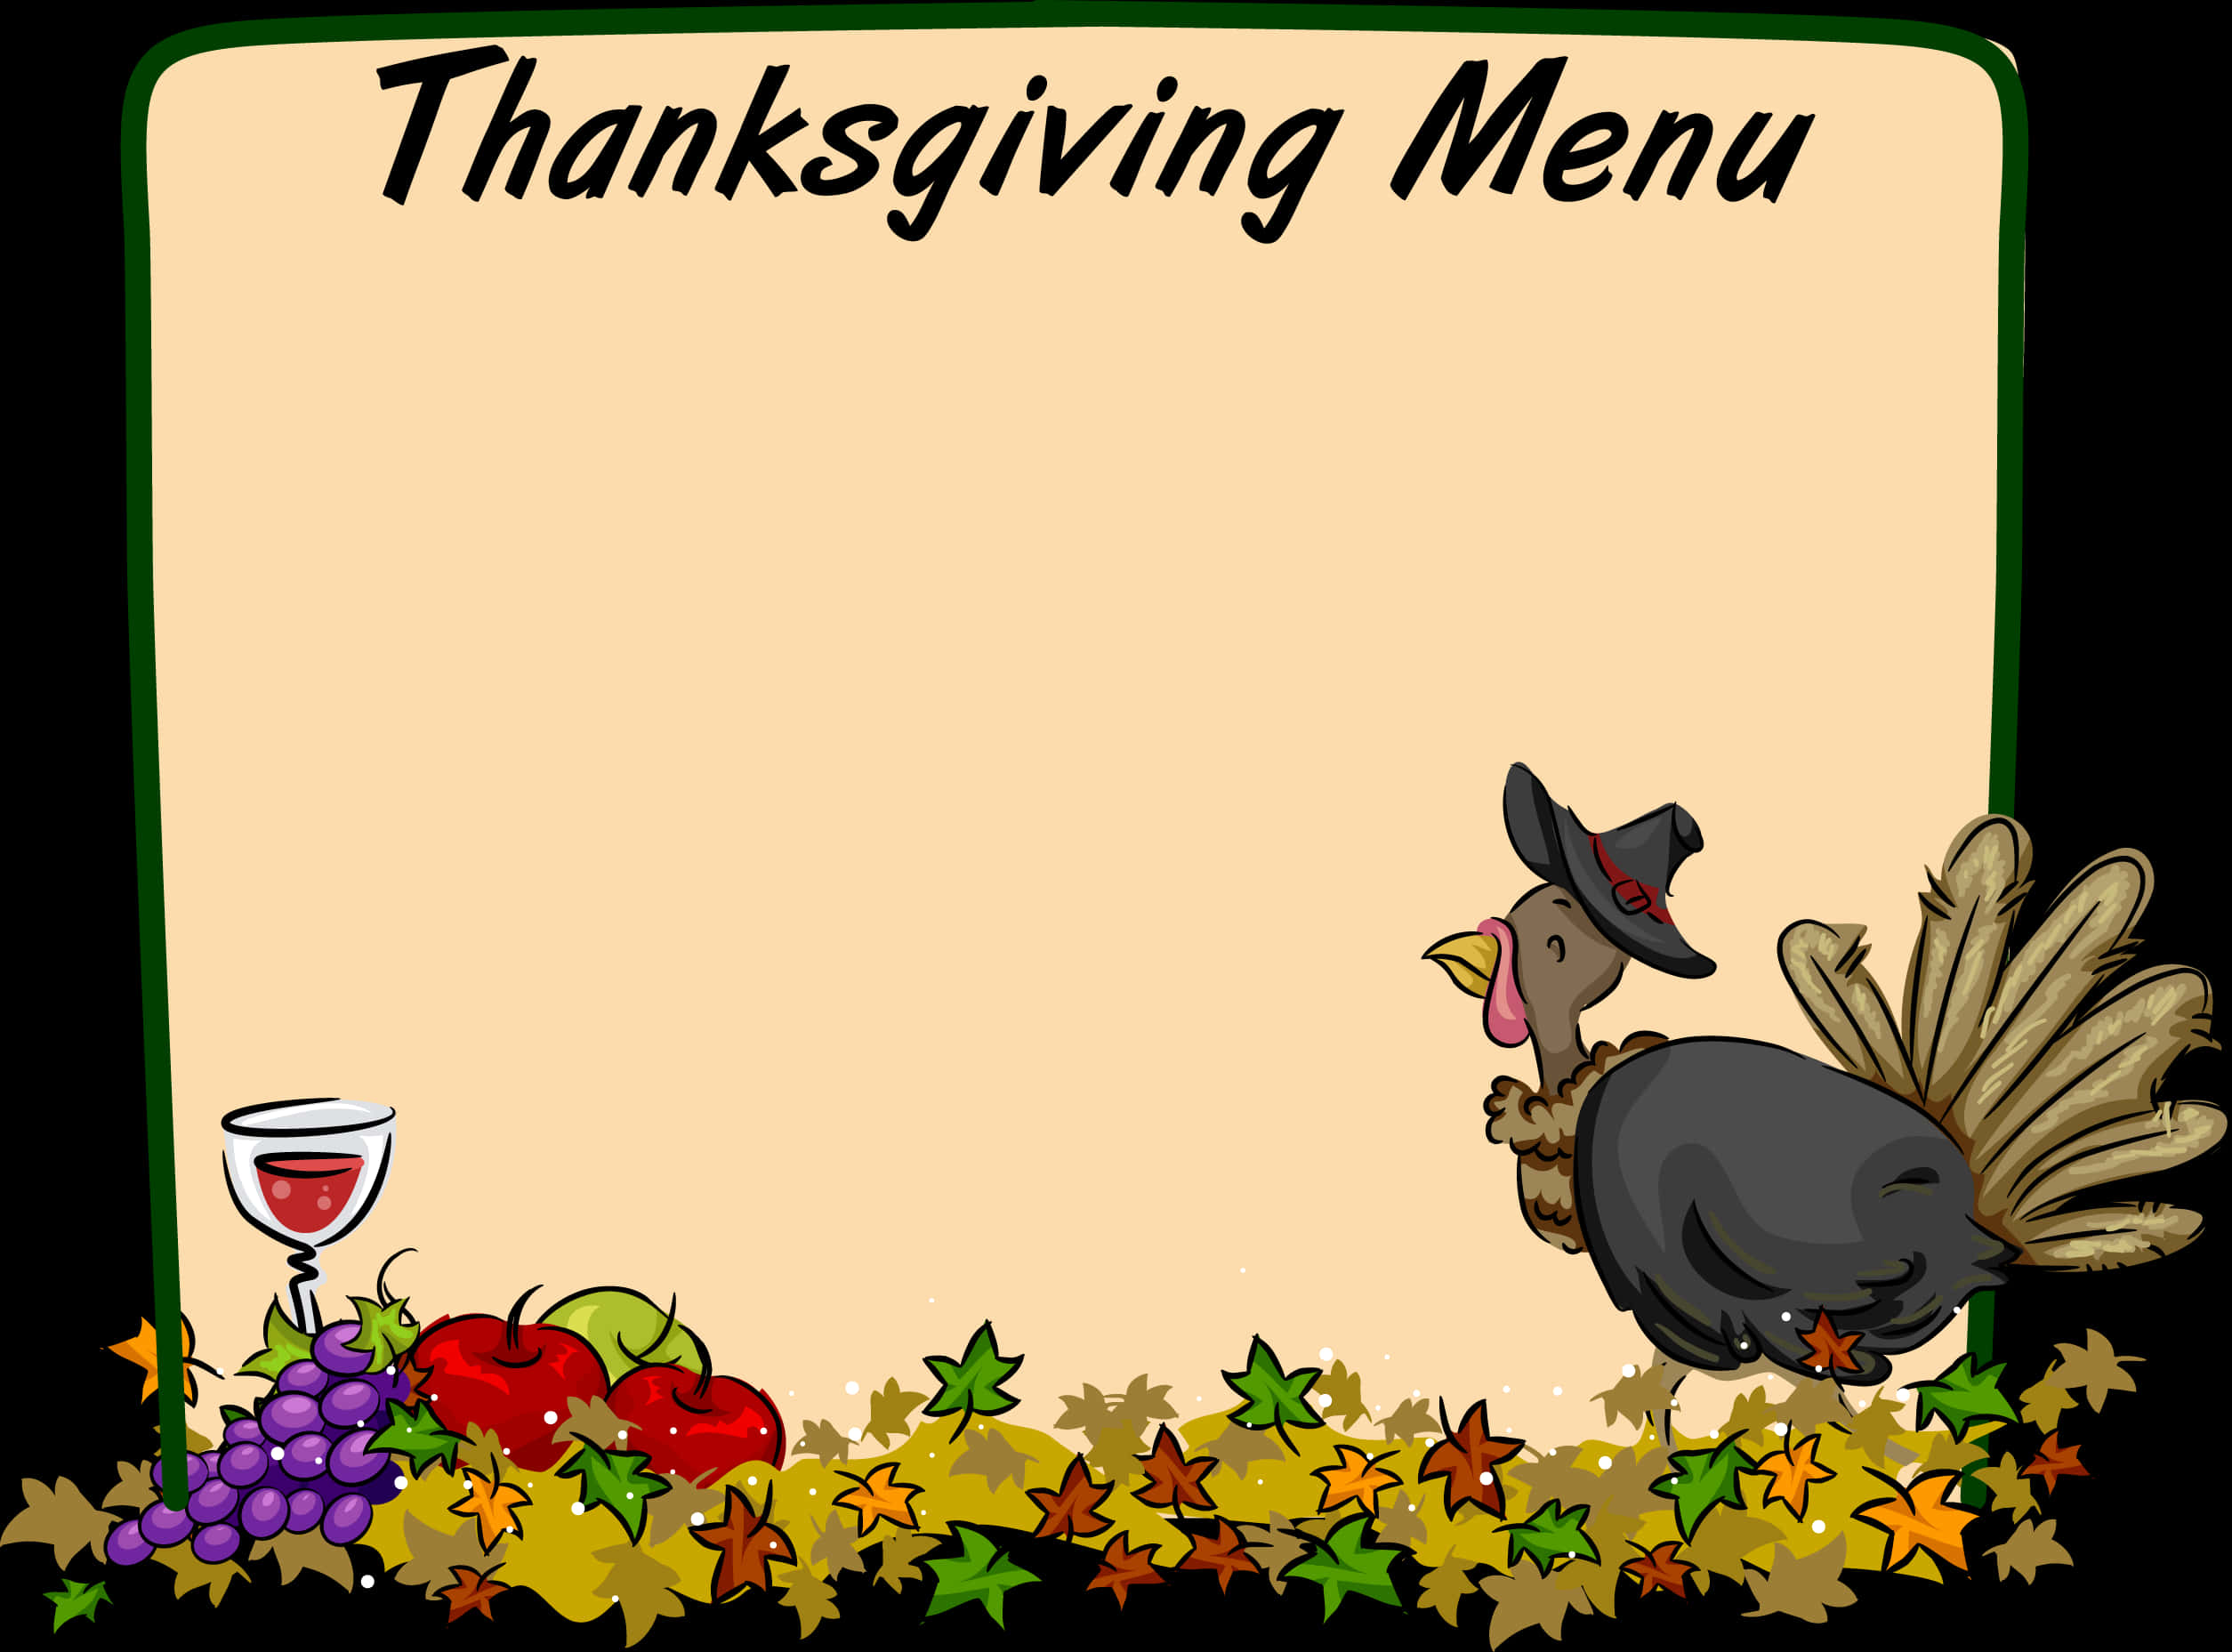 A Thanksgiving Menu With A Turkey And Fruit